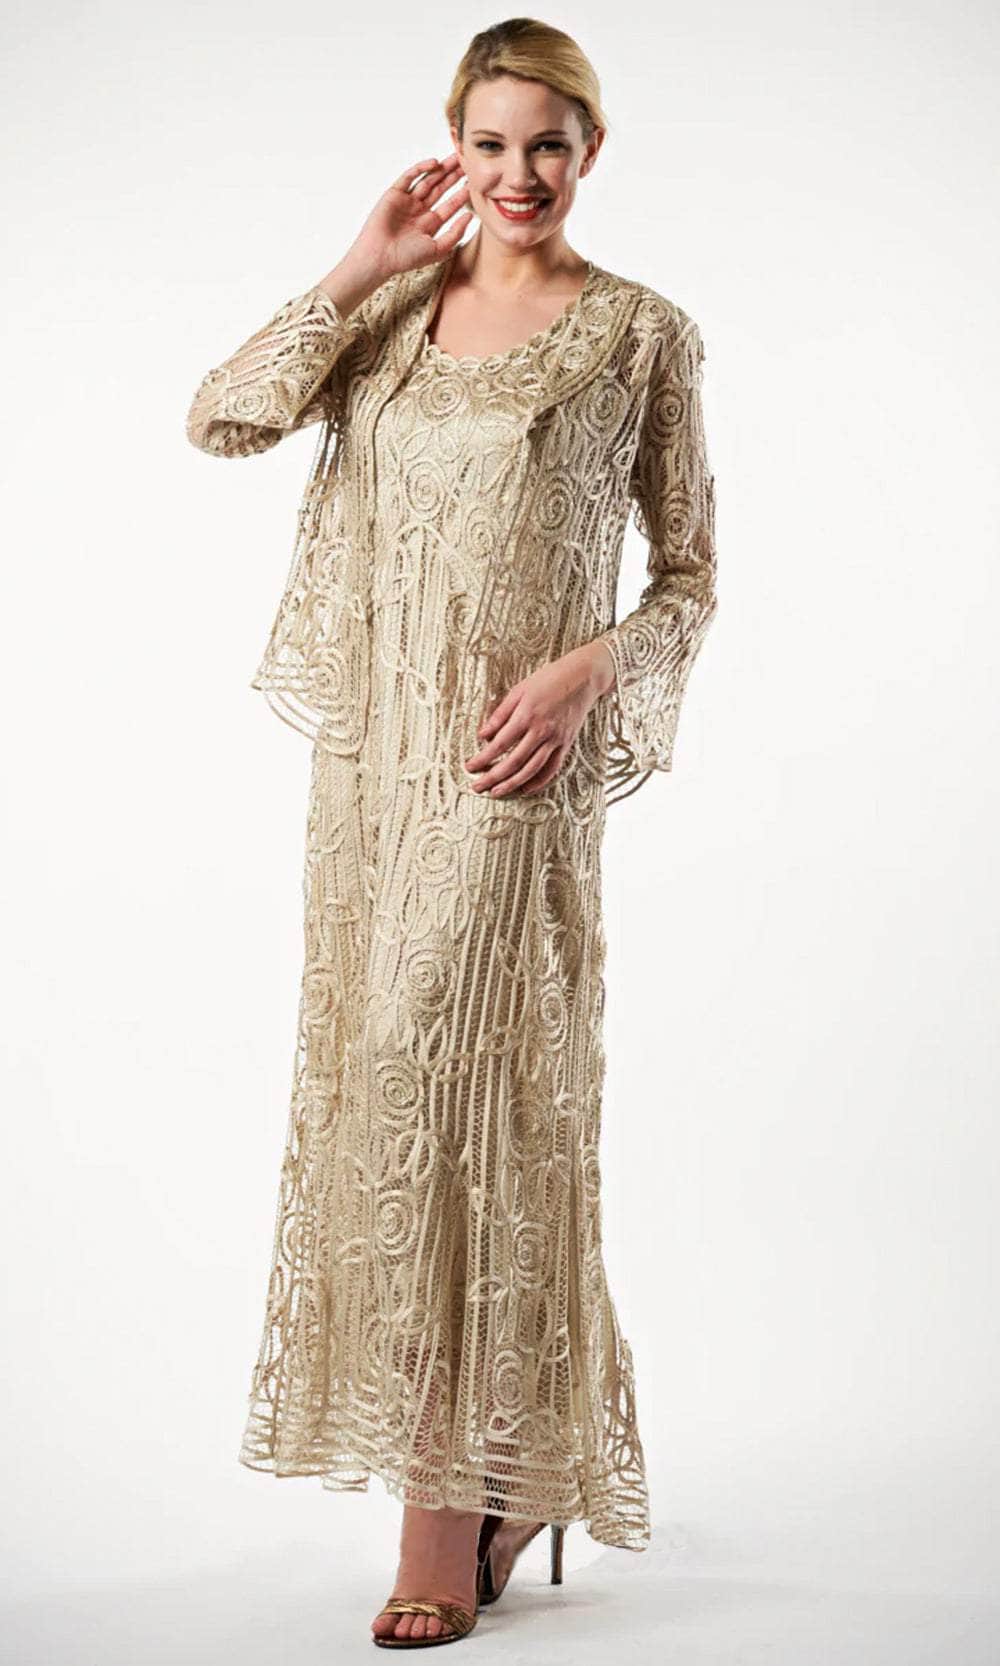 Soulmates C1068 - Beaded Silk Lace Collar Jacket With Godet Dress Set Mother of the Bride Dresses